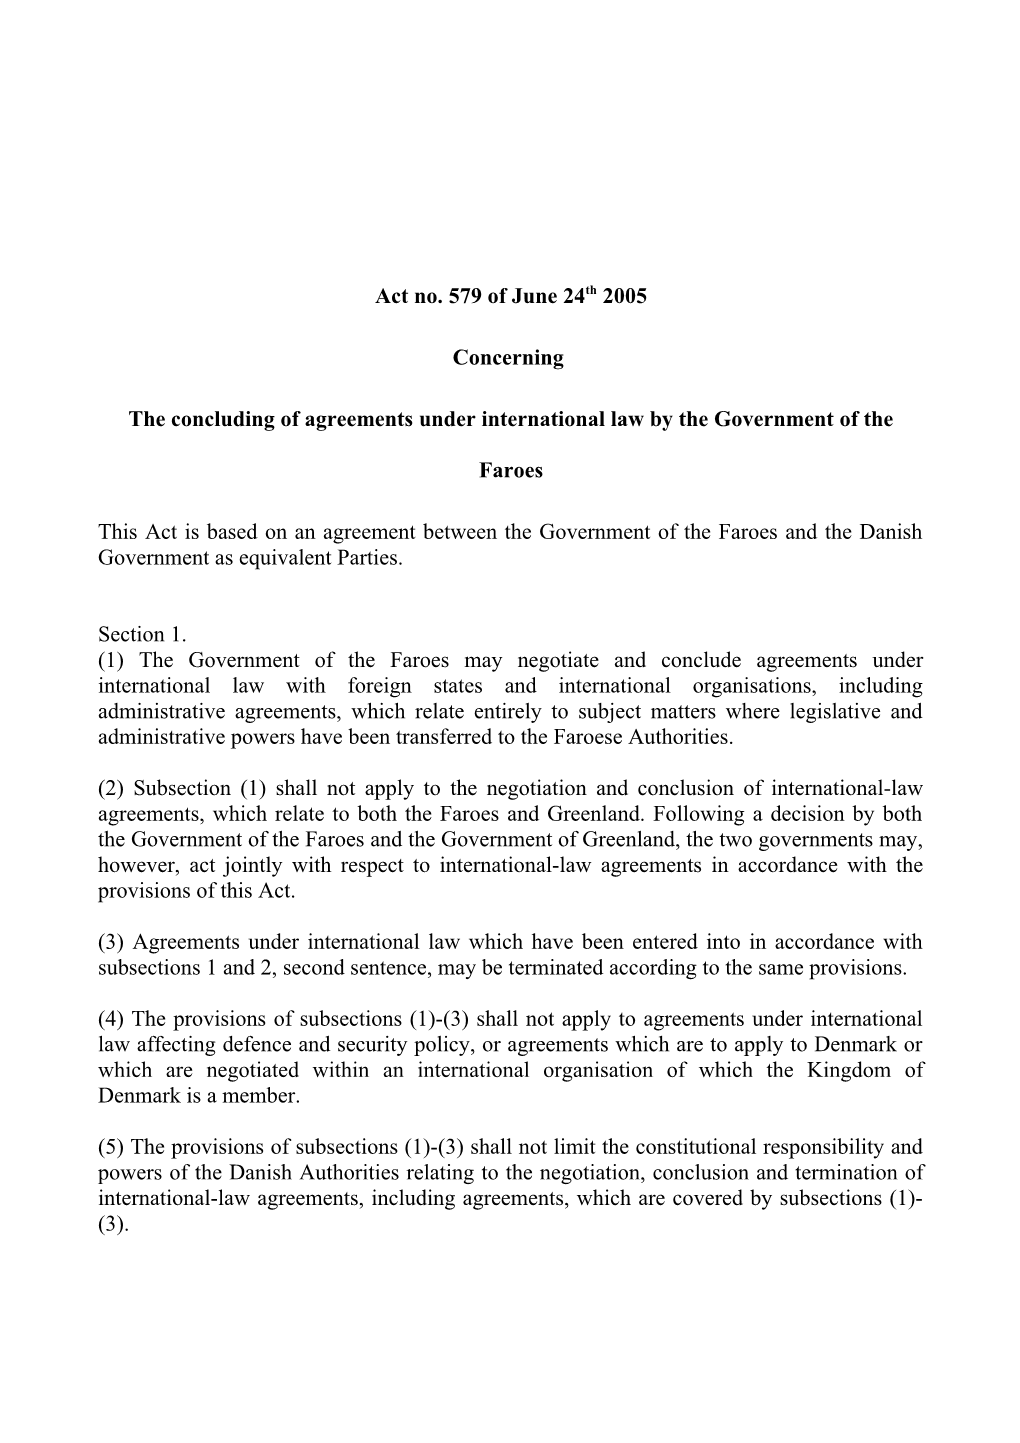 The Concluding of Agreements Under International Law by the Government of the Faroes